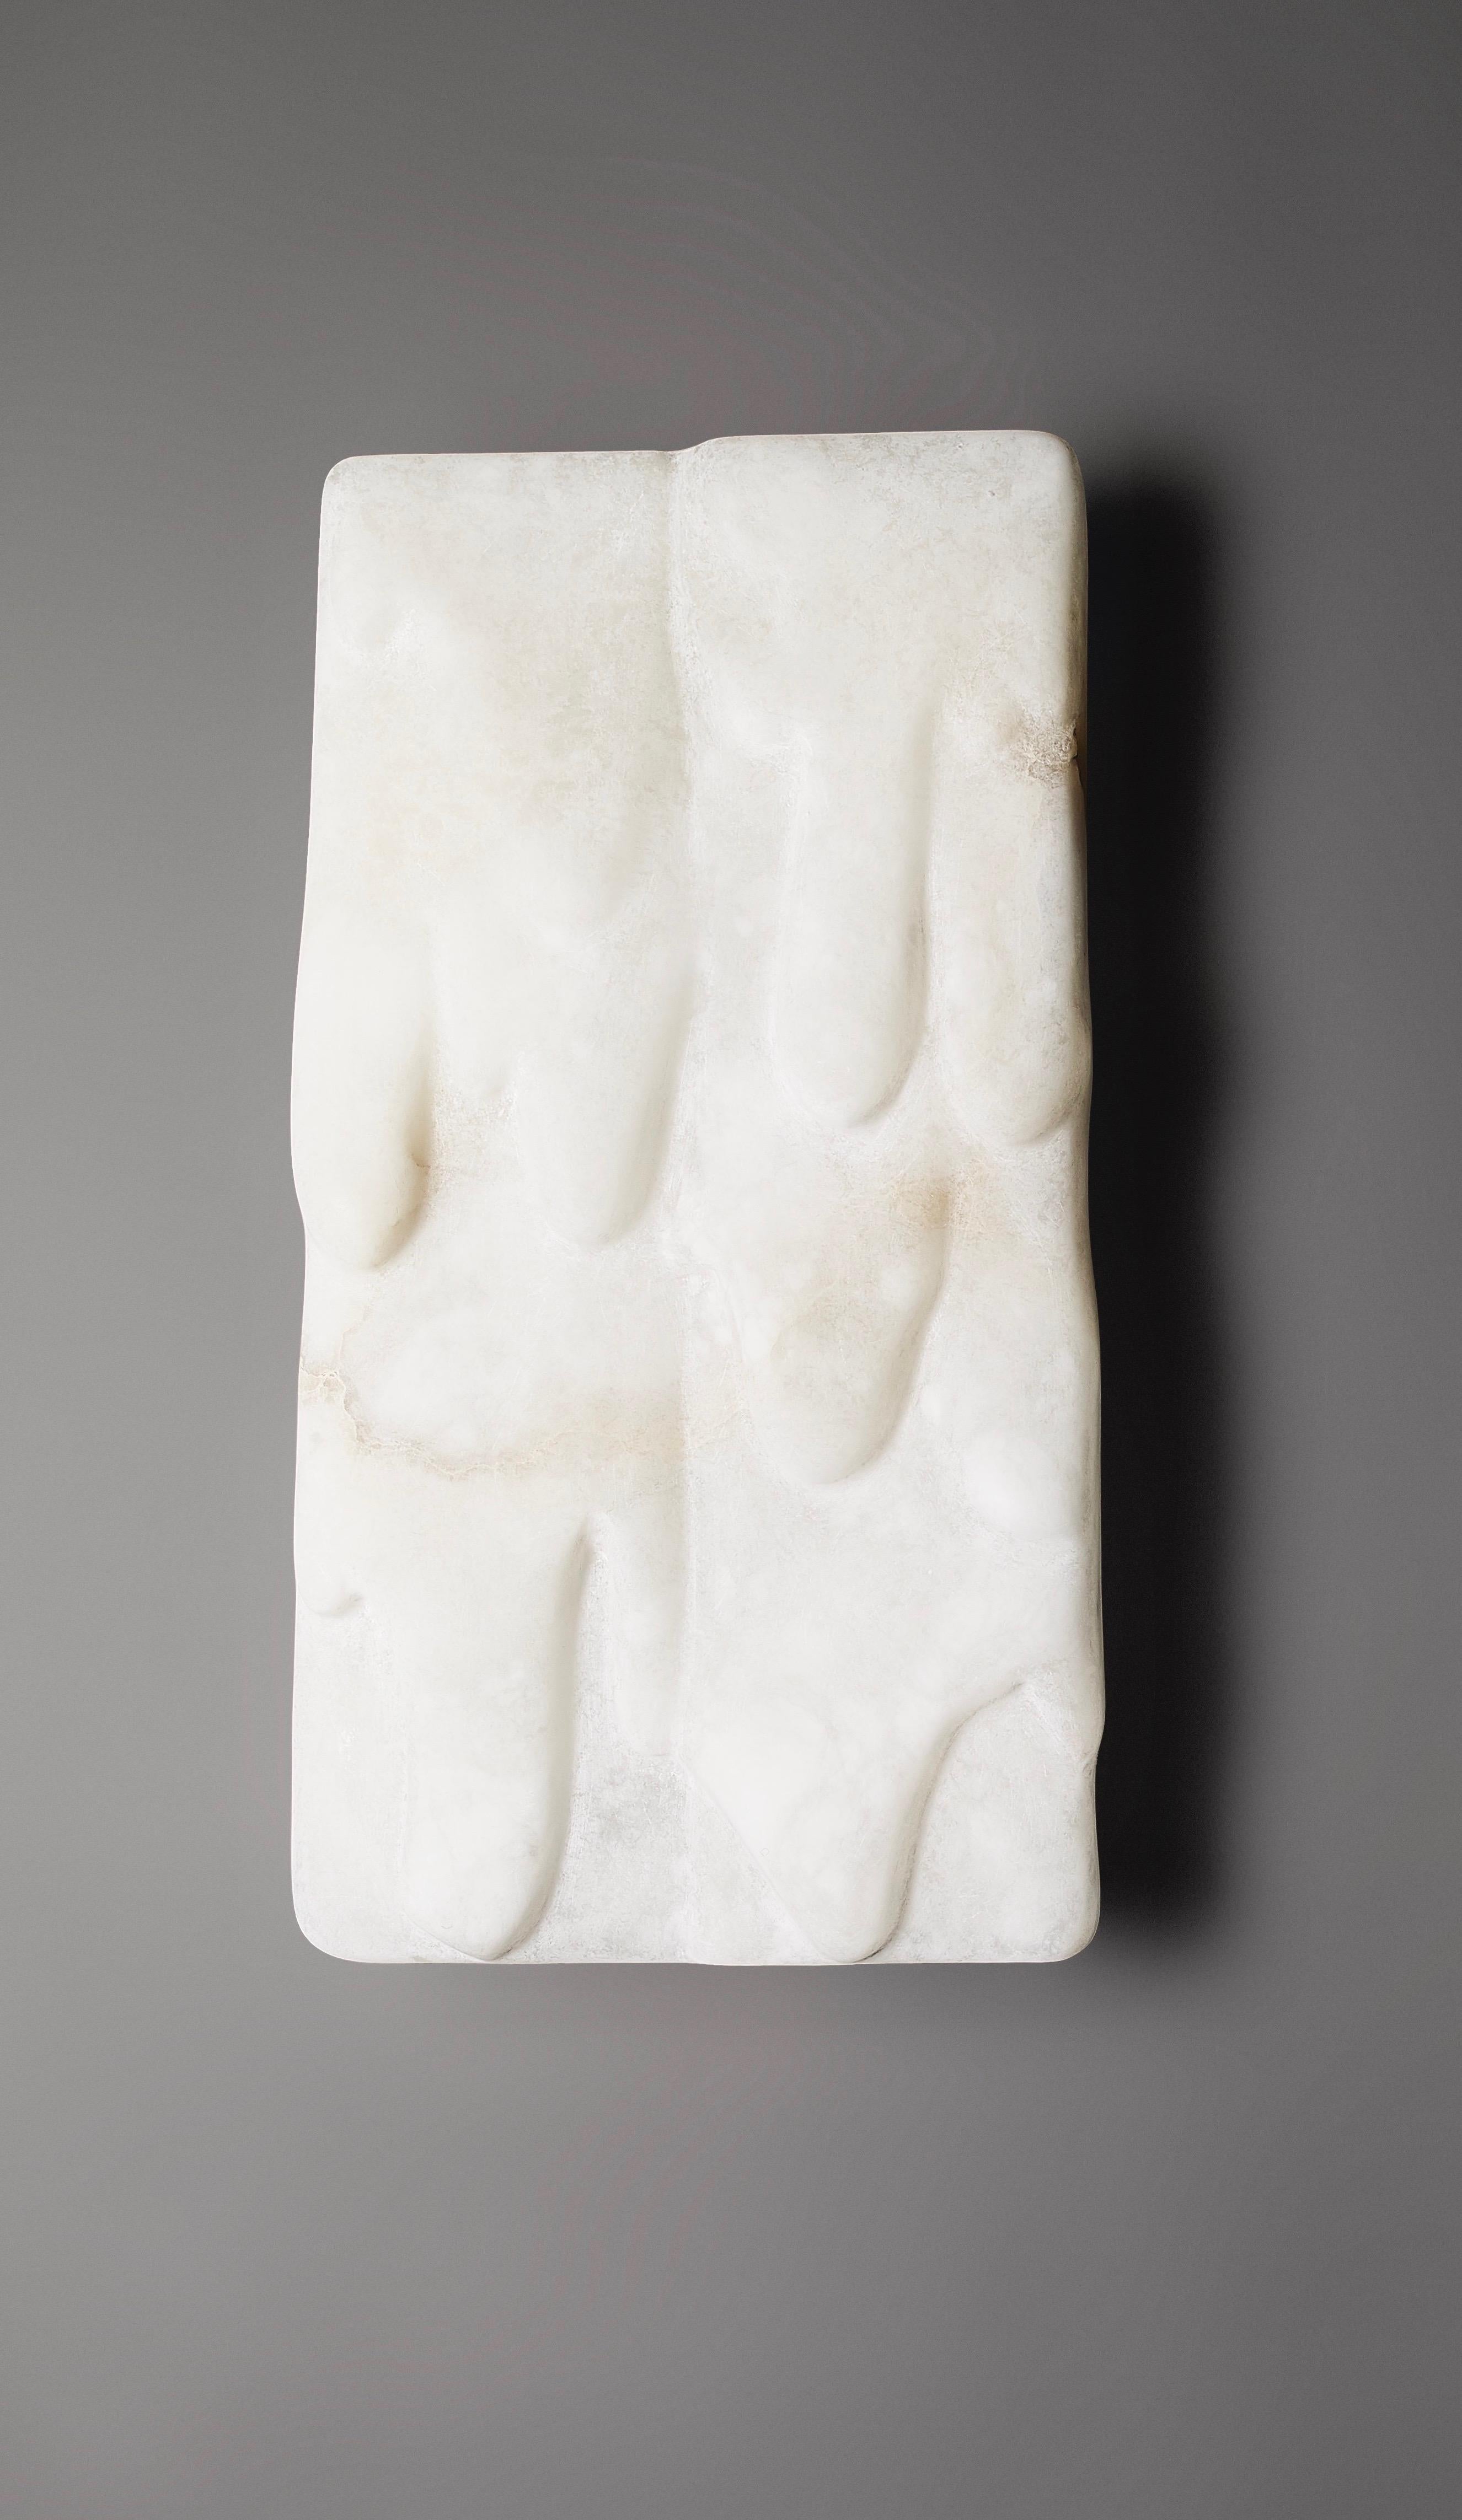 Hand-Crafted Bespoke Minimalist Italian Neoclassical Drop Decor White Alabaster Modern Sconce